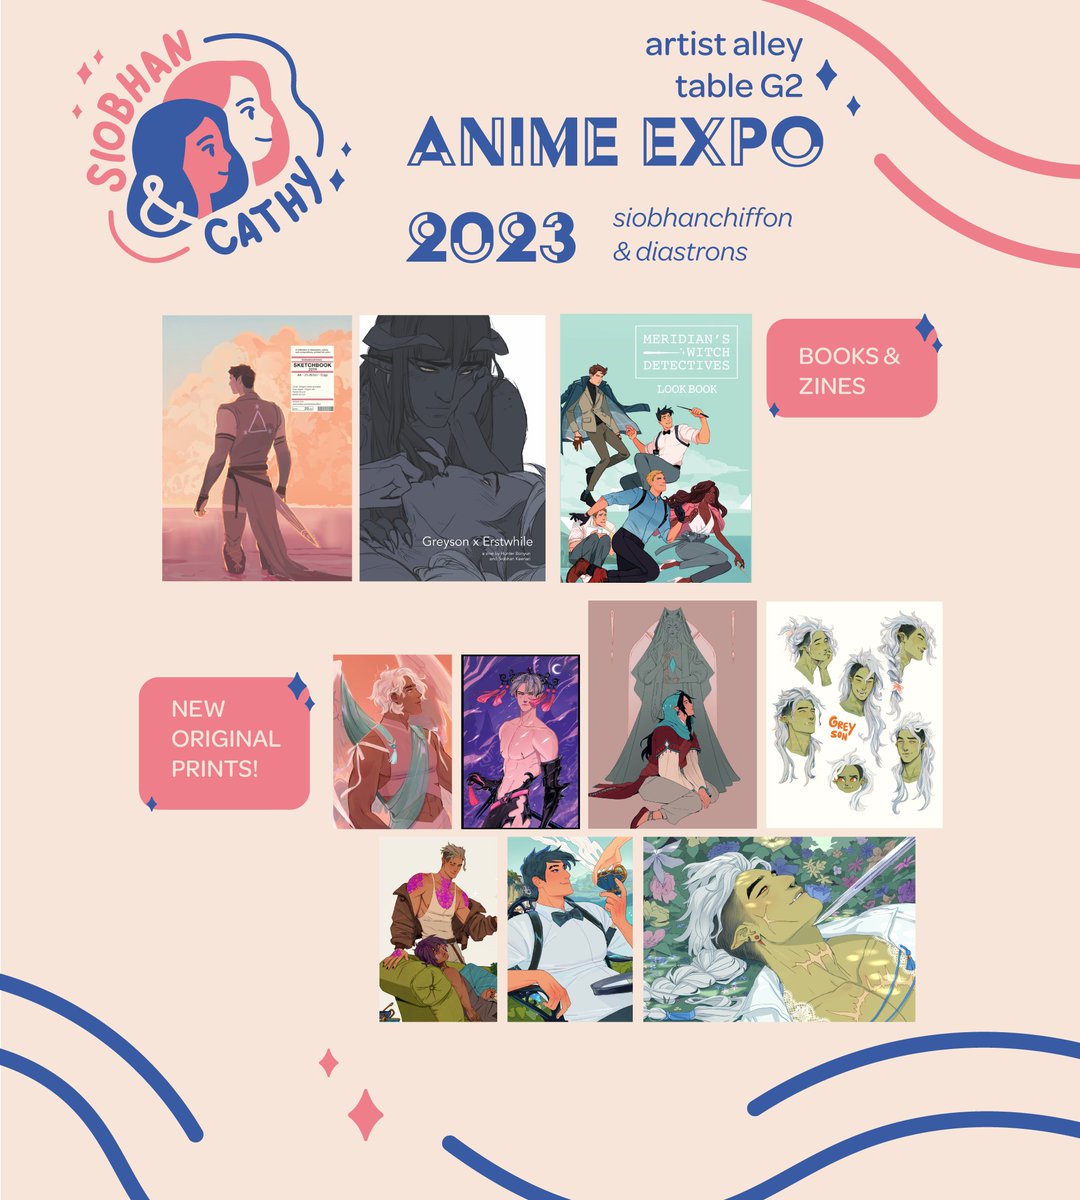 🩷 Mine and Cathy's catalogue for Anime Expo 2023!! You can find us at table G2 in artist alley, right near the entrance. 💙 #AX2023 #AX2023ArtistAlley